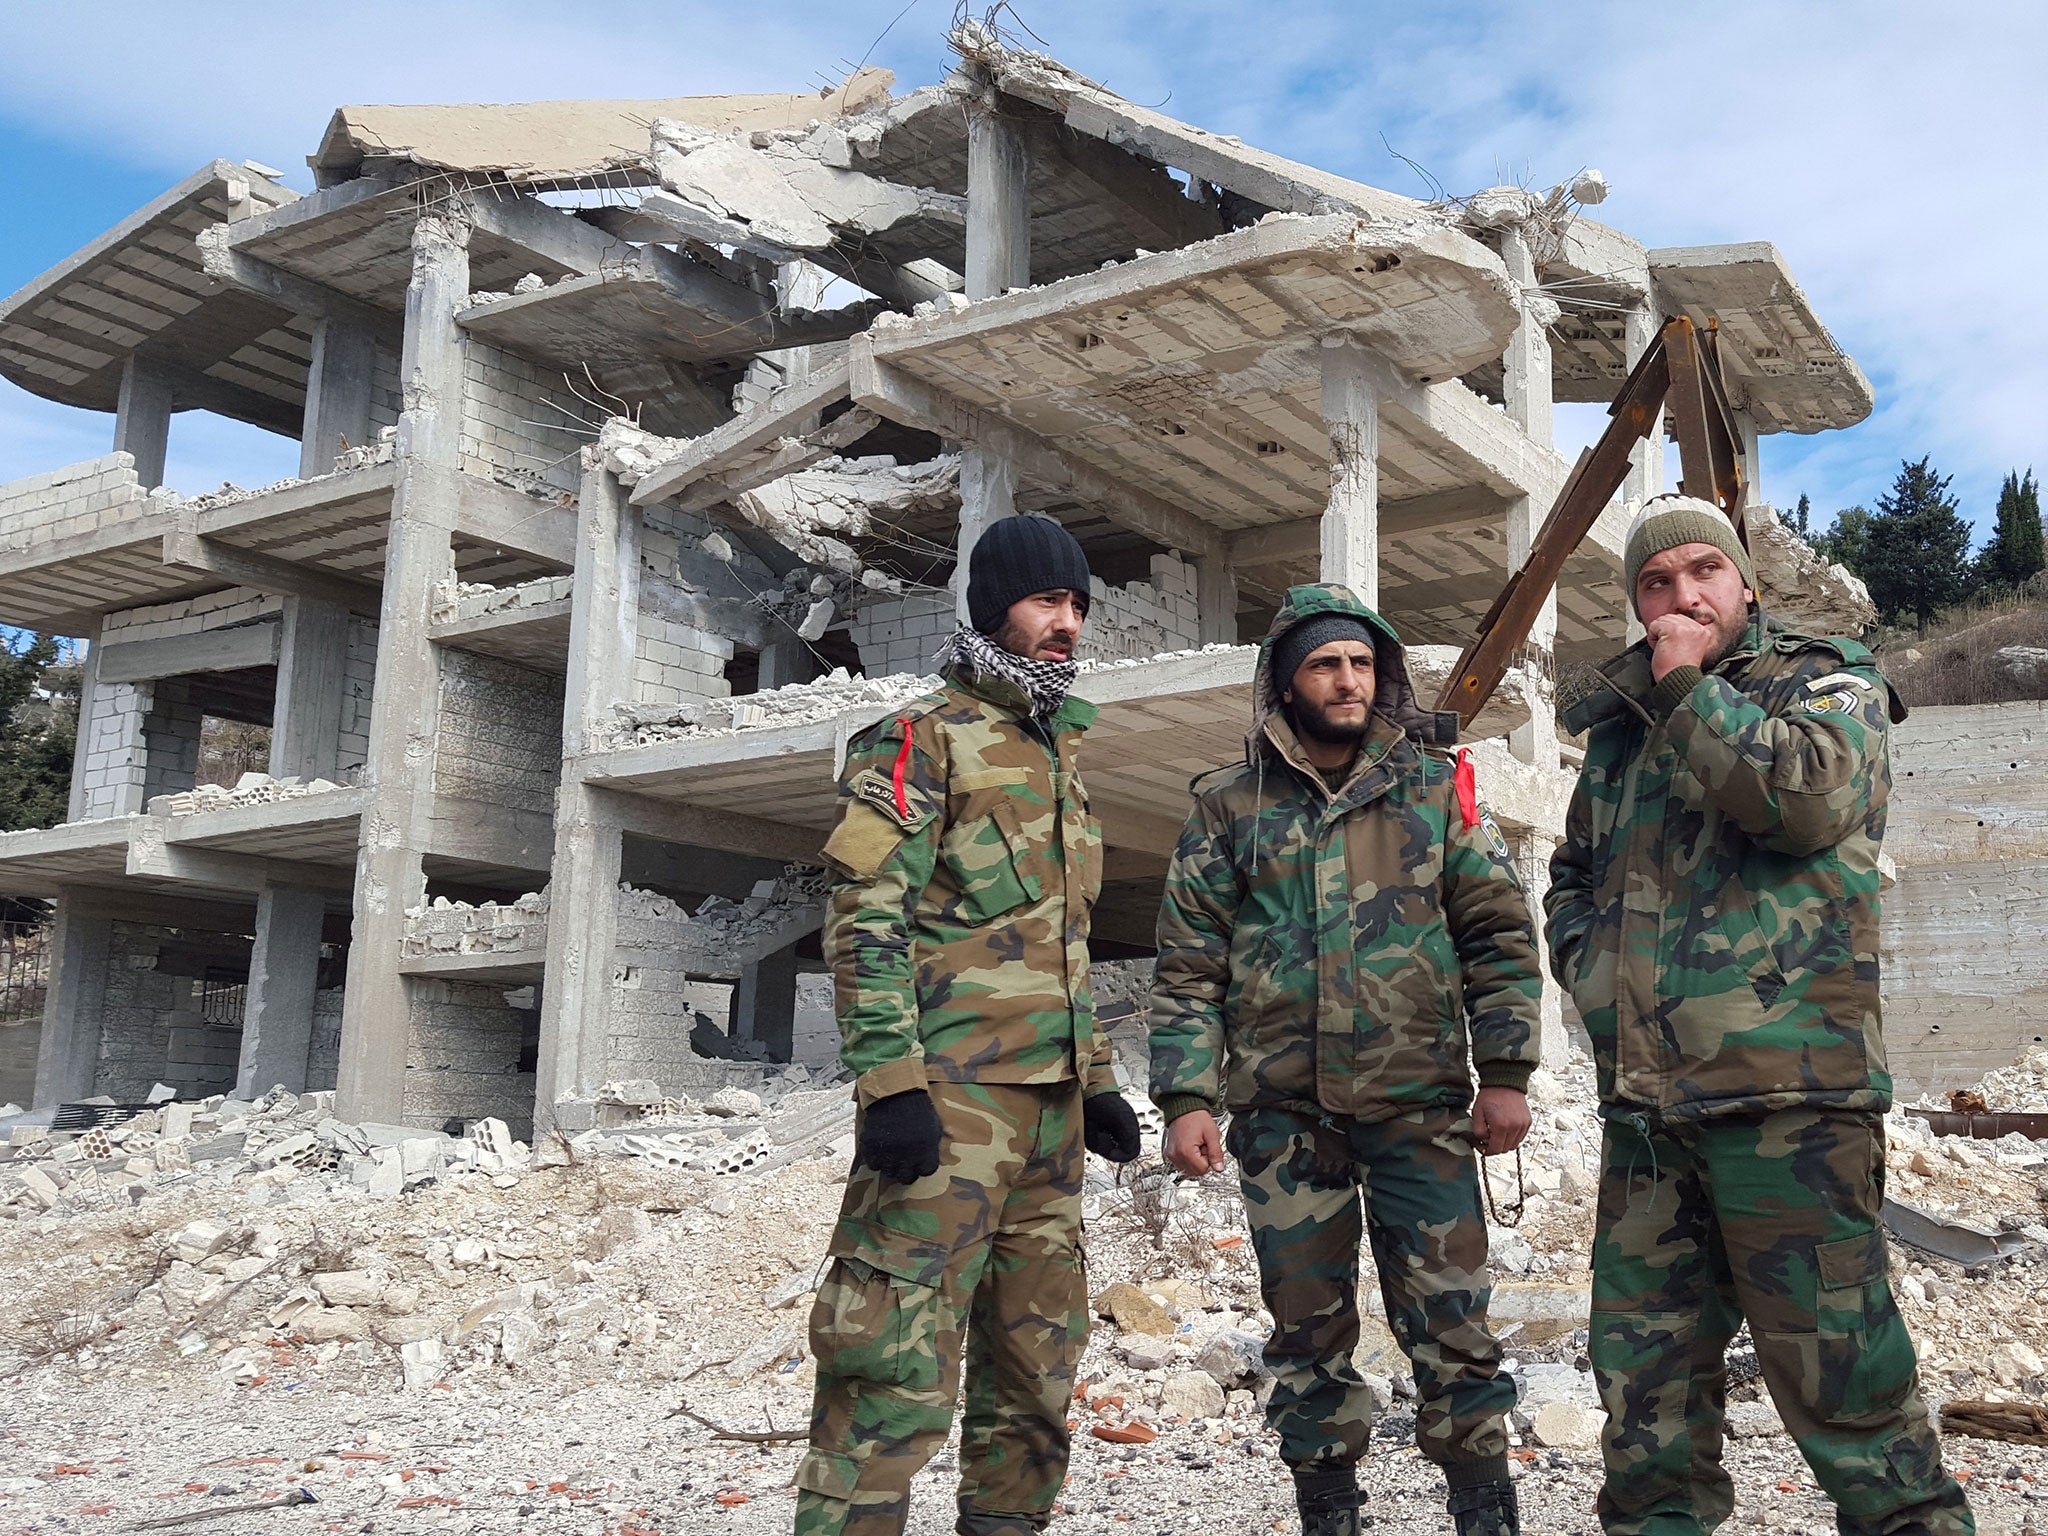 Pro-government Syrian forces in al-Rabiaa who have recently taken the town from rebels